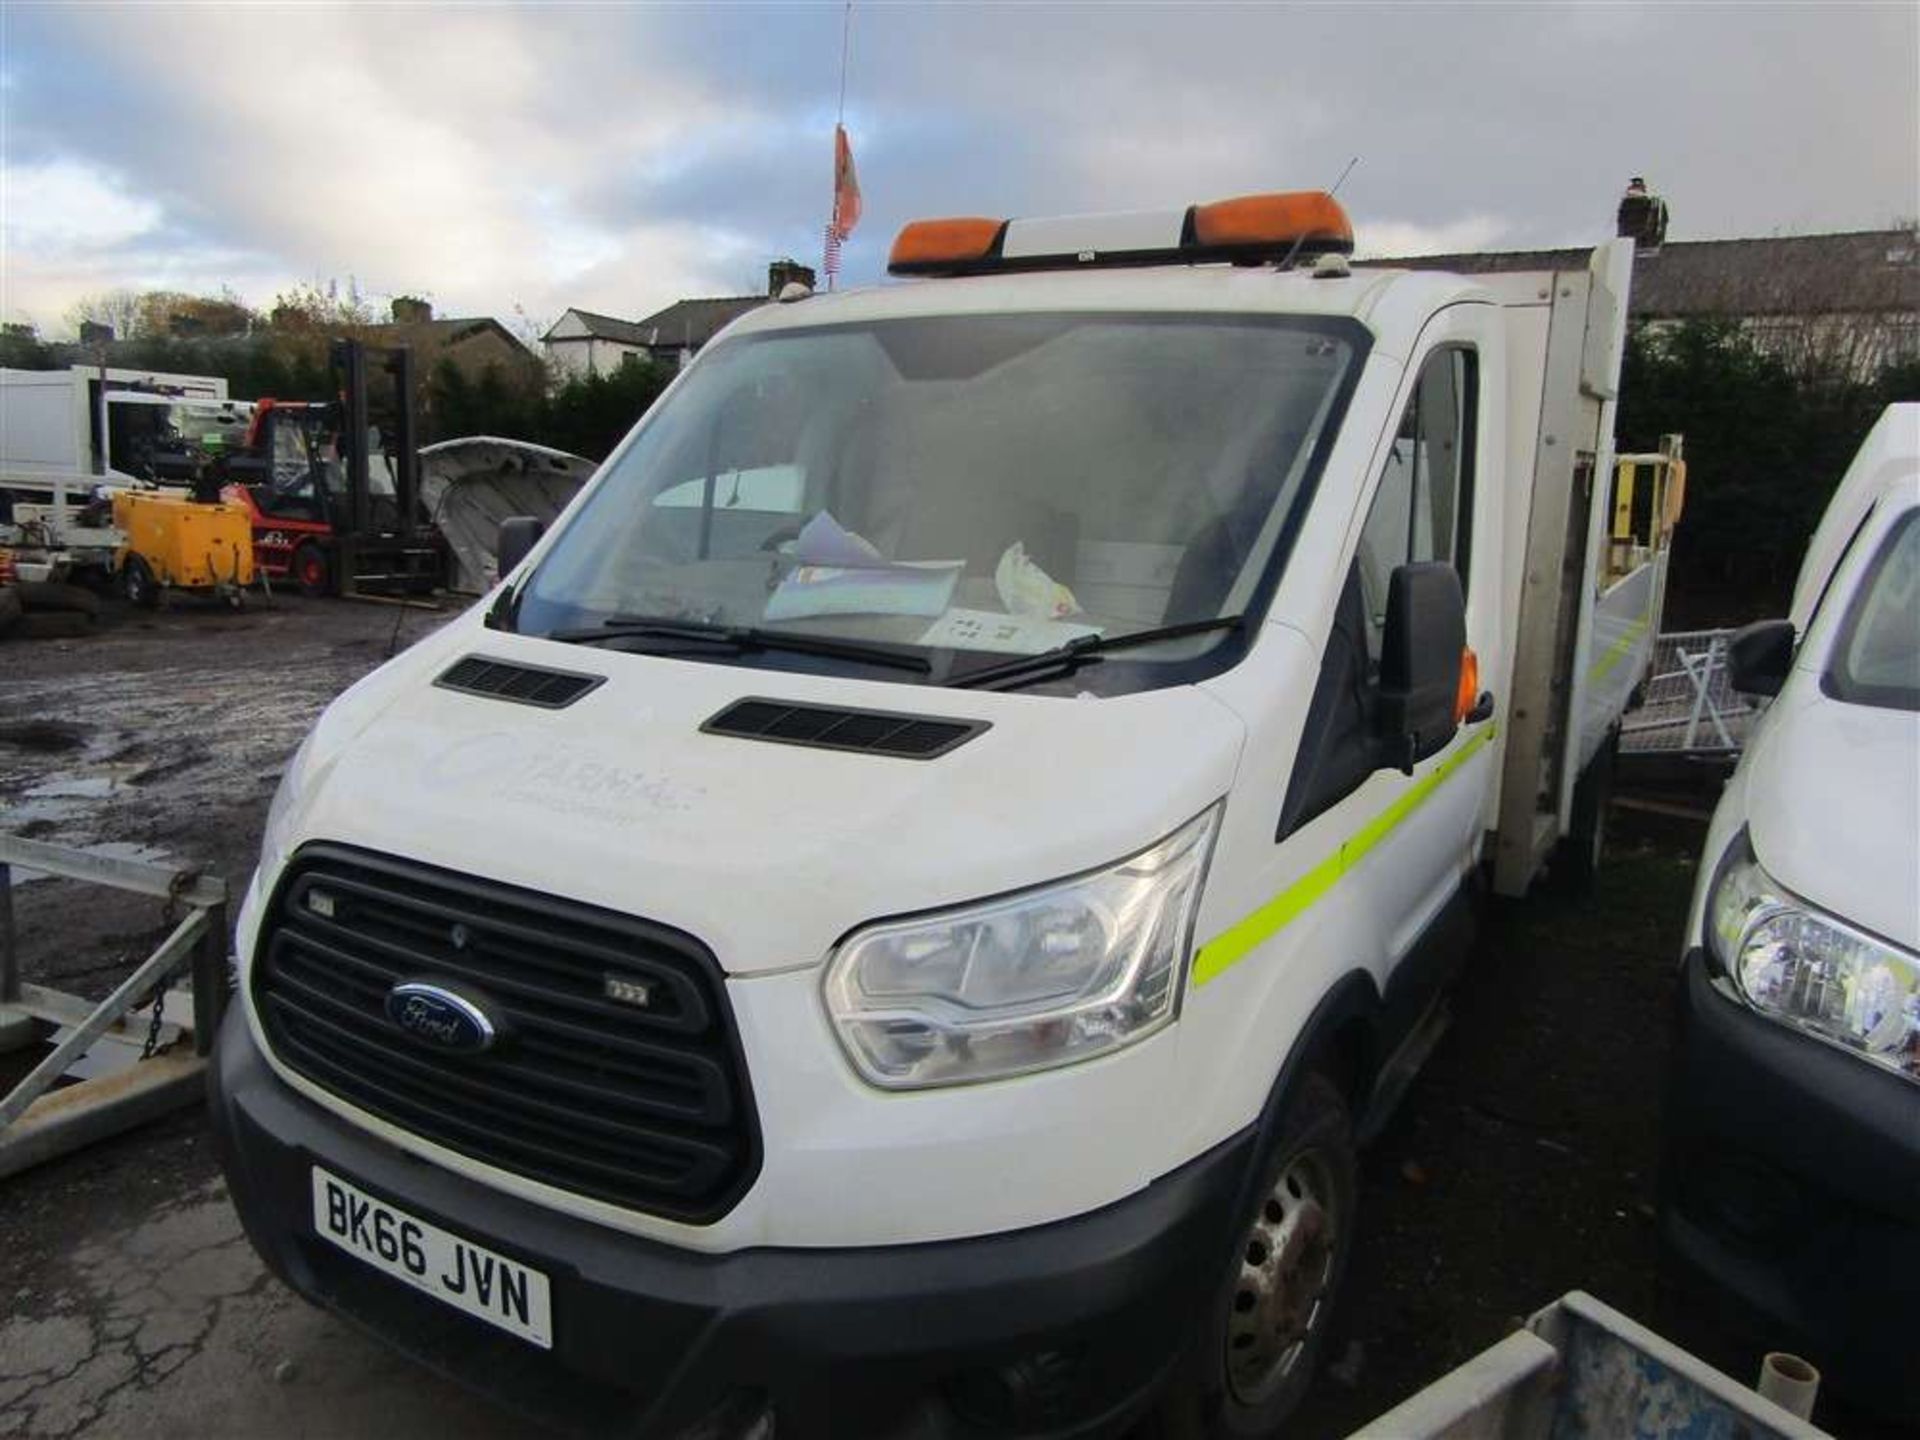 2016 66 reg Ford Transit 350 Dropside (Non Runner) (Starts But Cuts Out) - Image 2 of 5